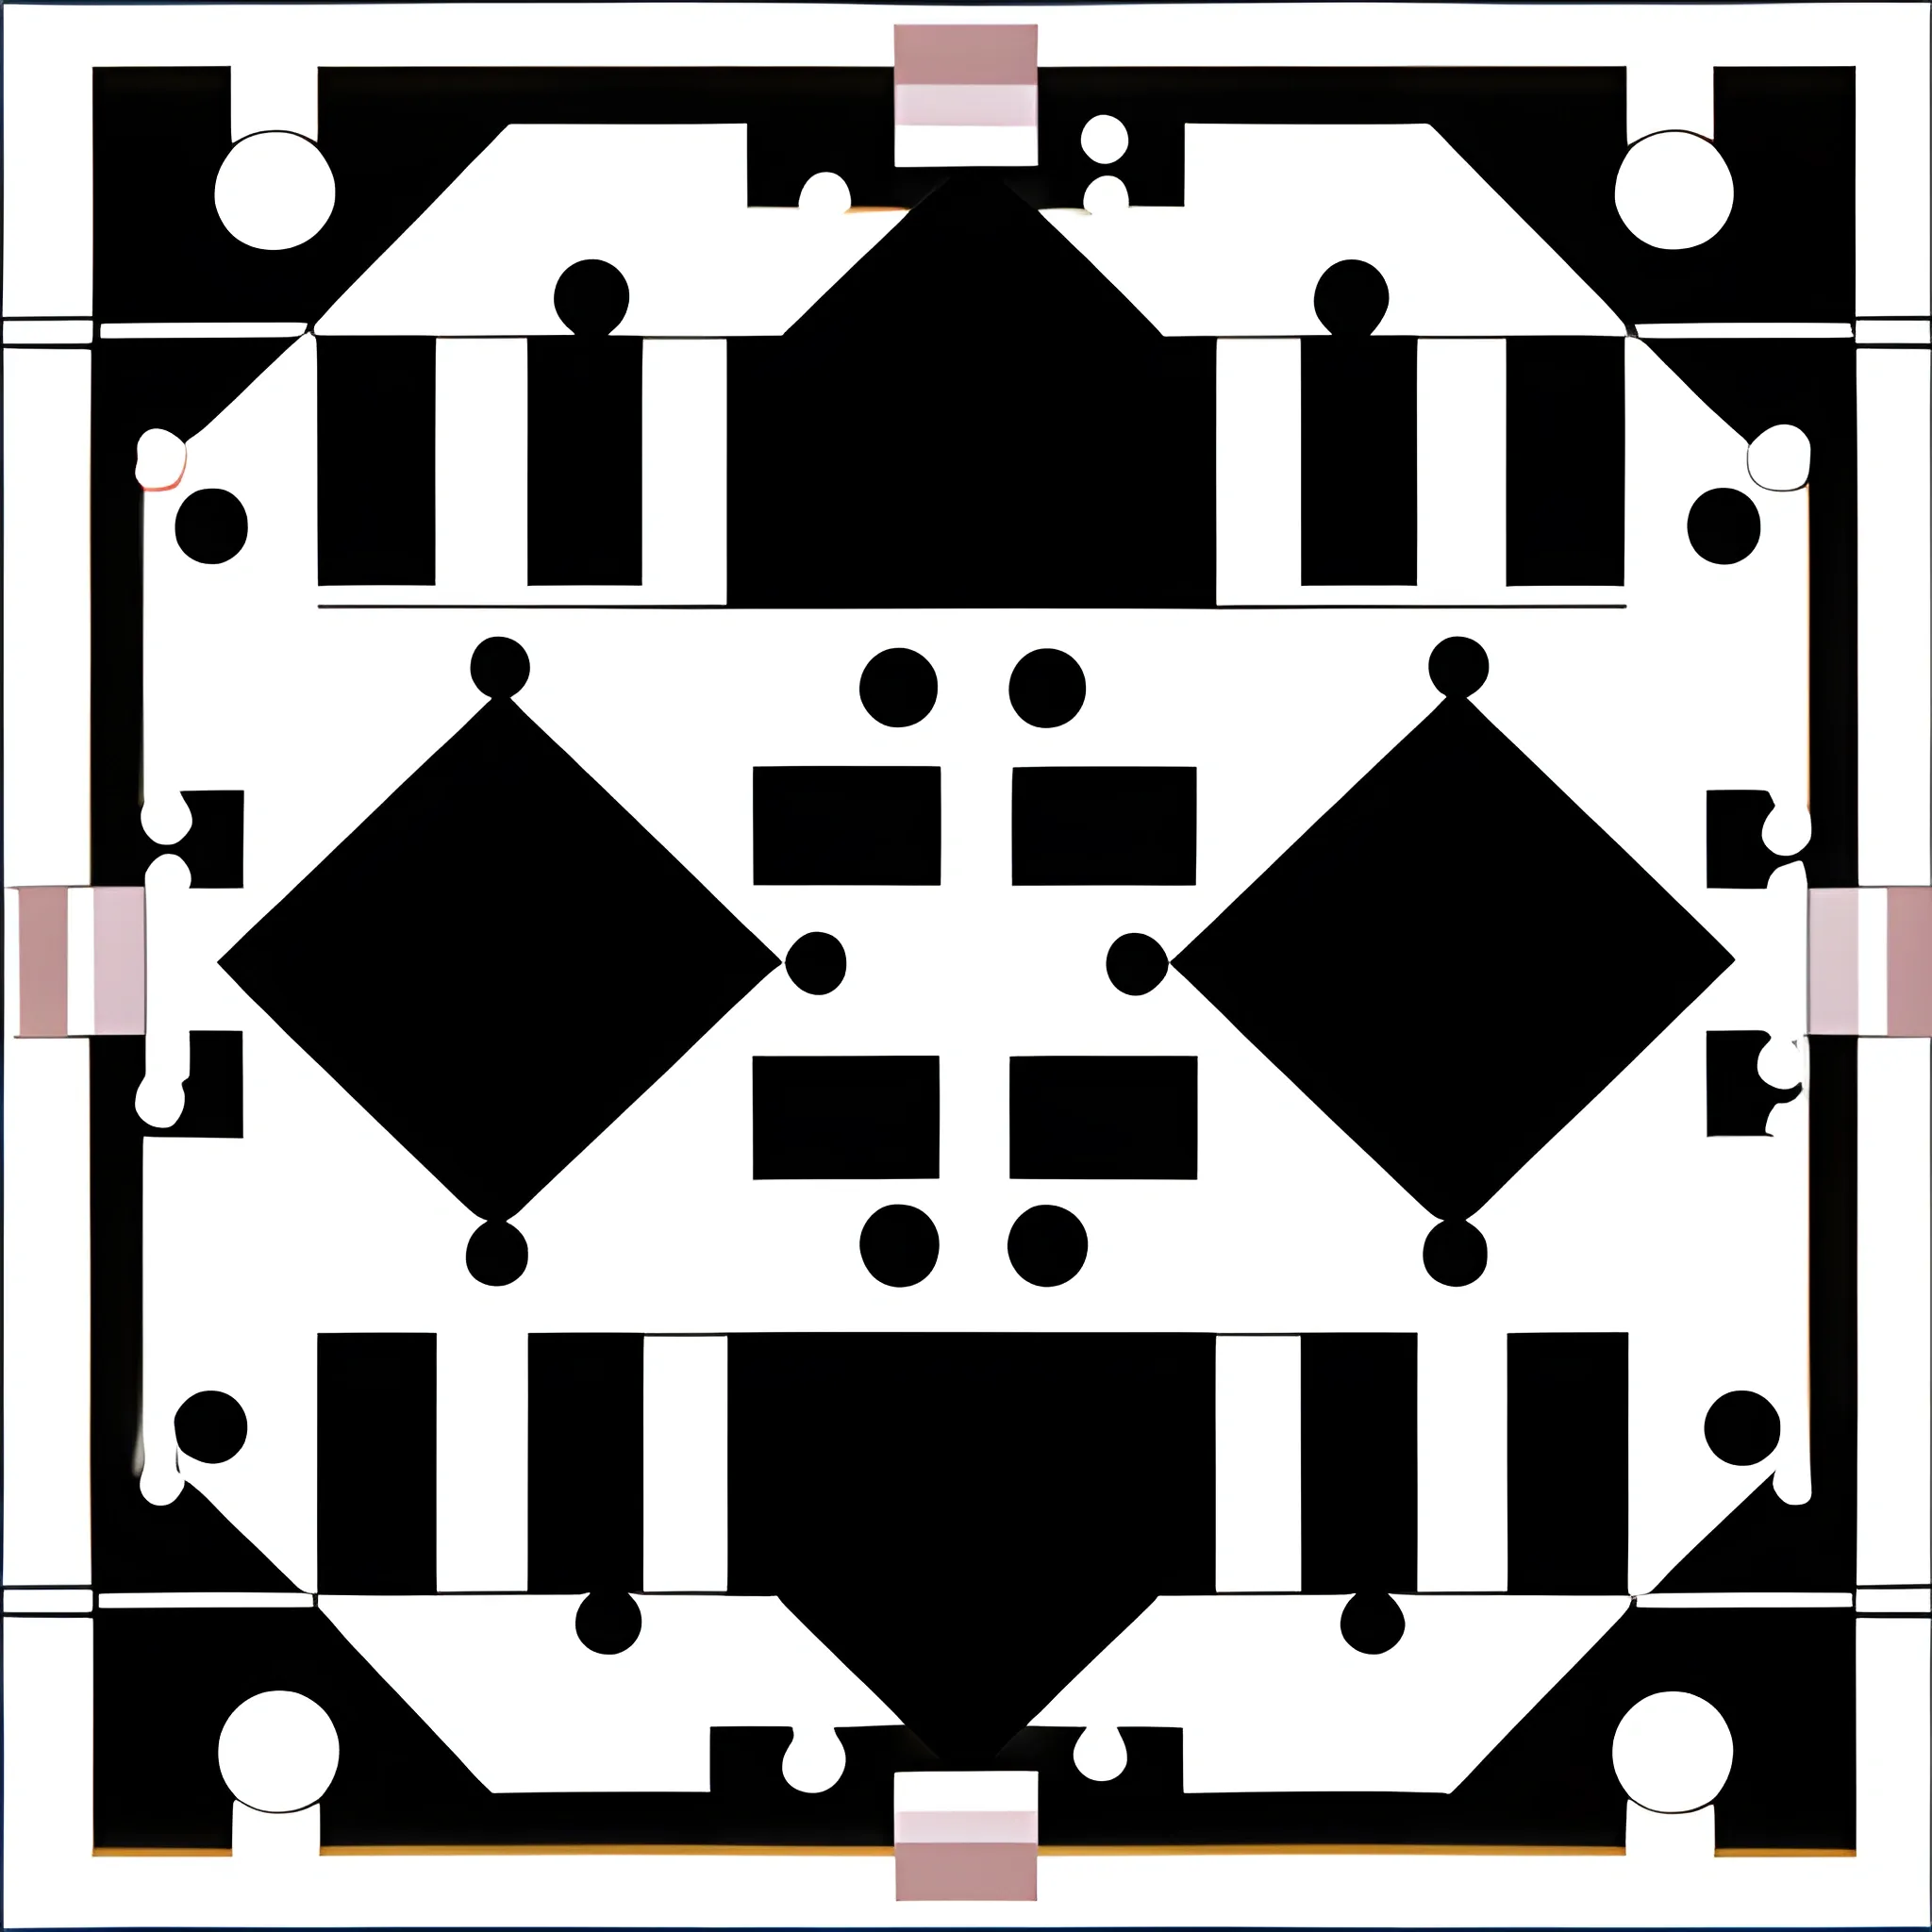 simple puzzle pattern with 20 differente pieces, white pieces, black border, pieces with straight edges, square resolution., Cartoon.